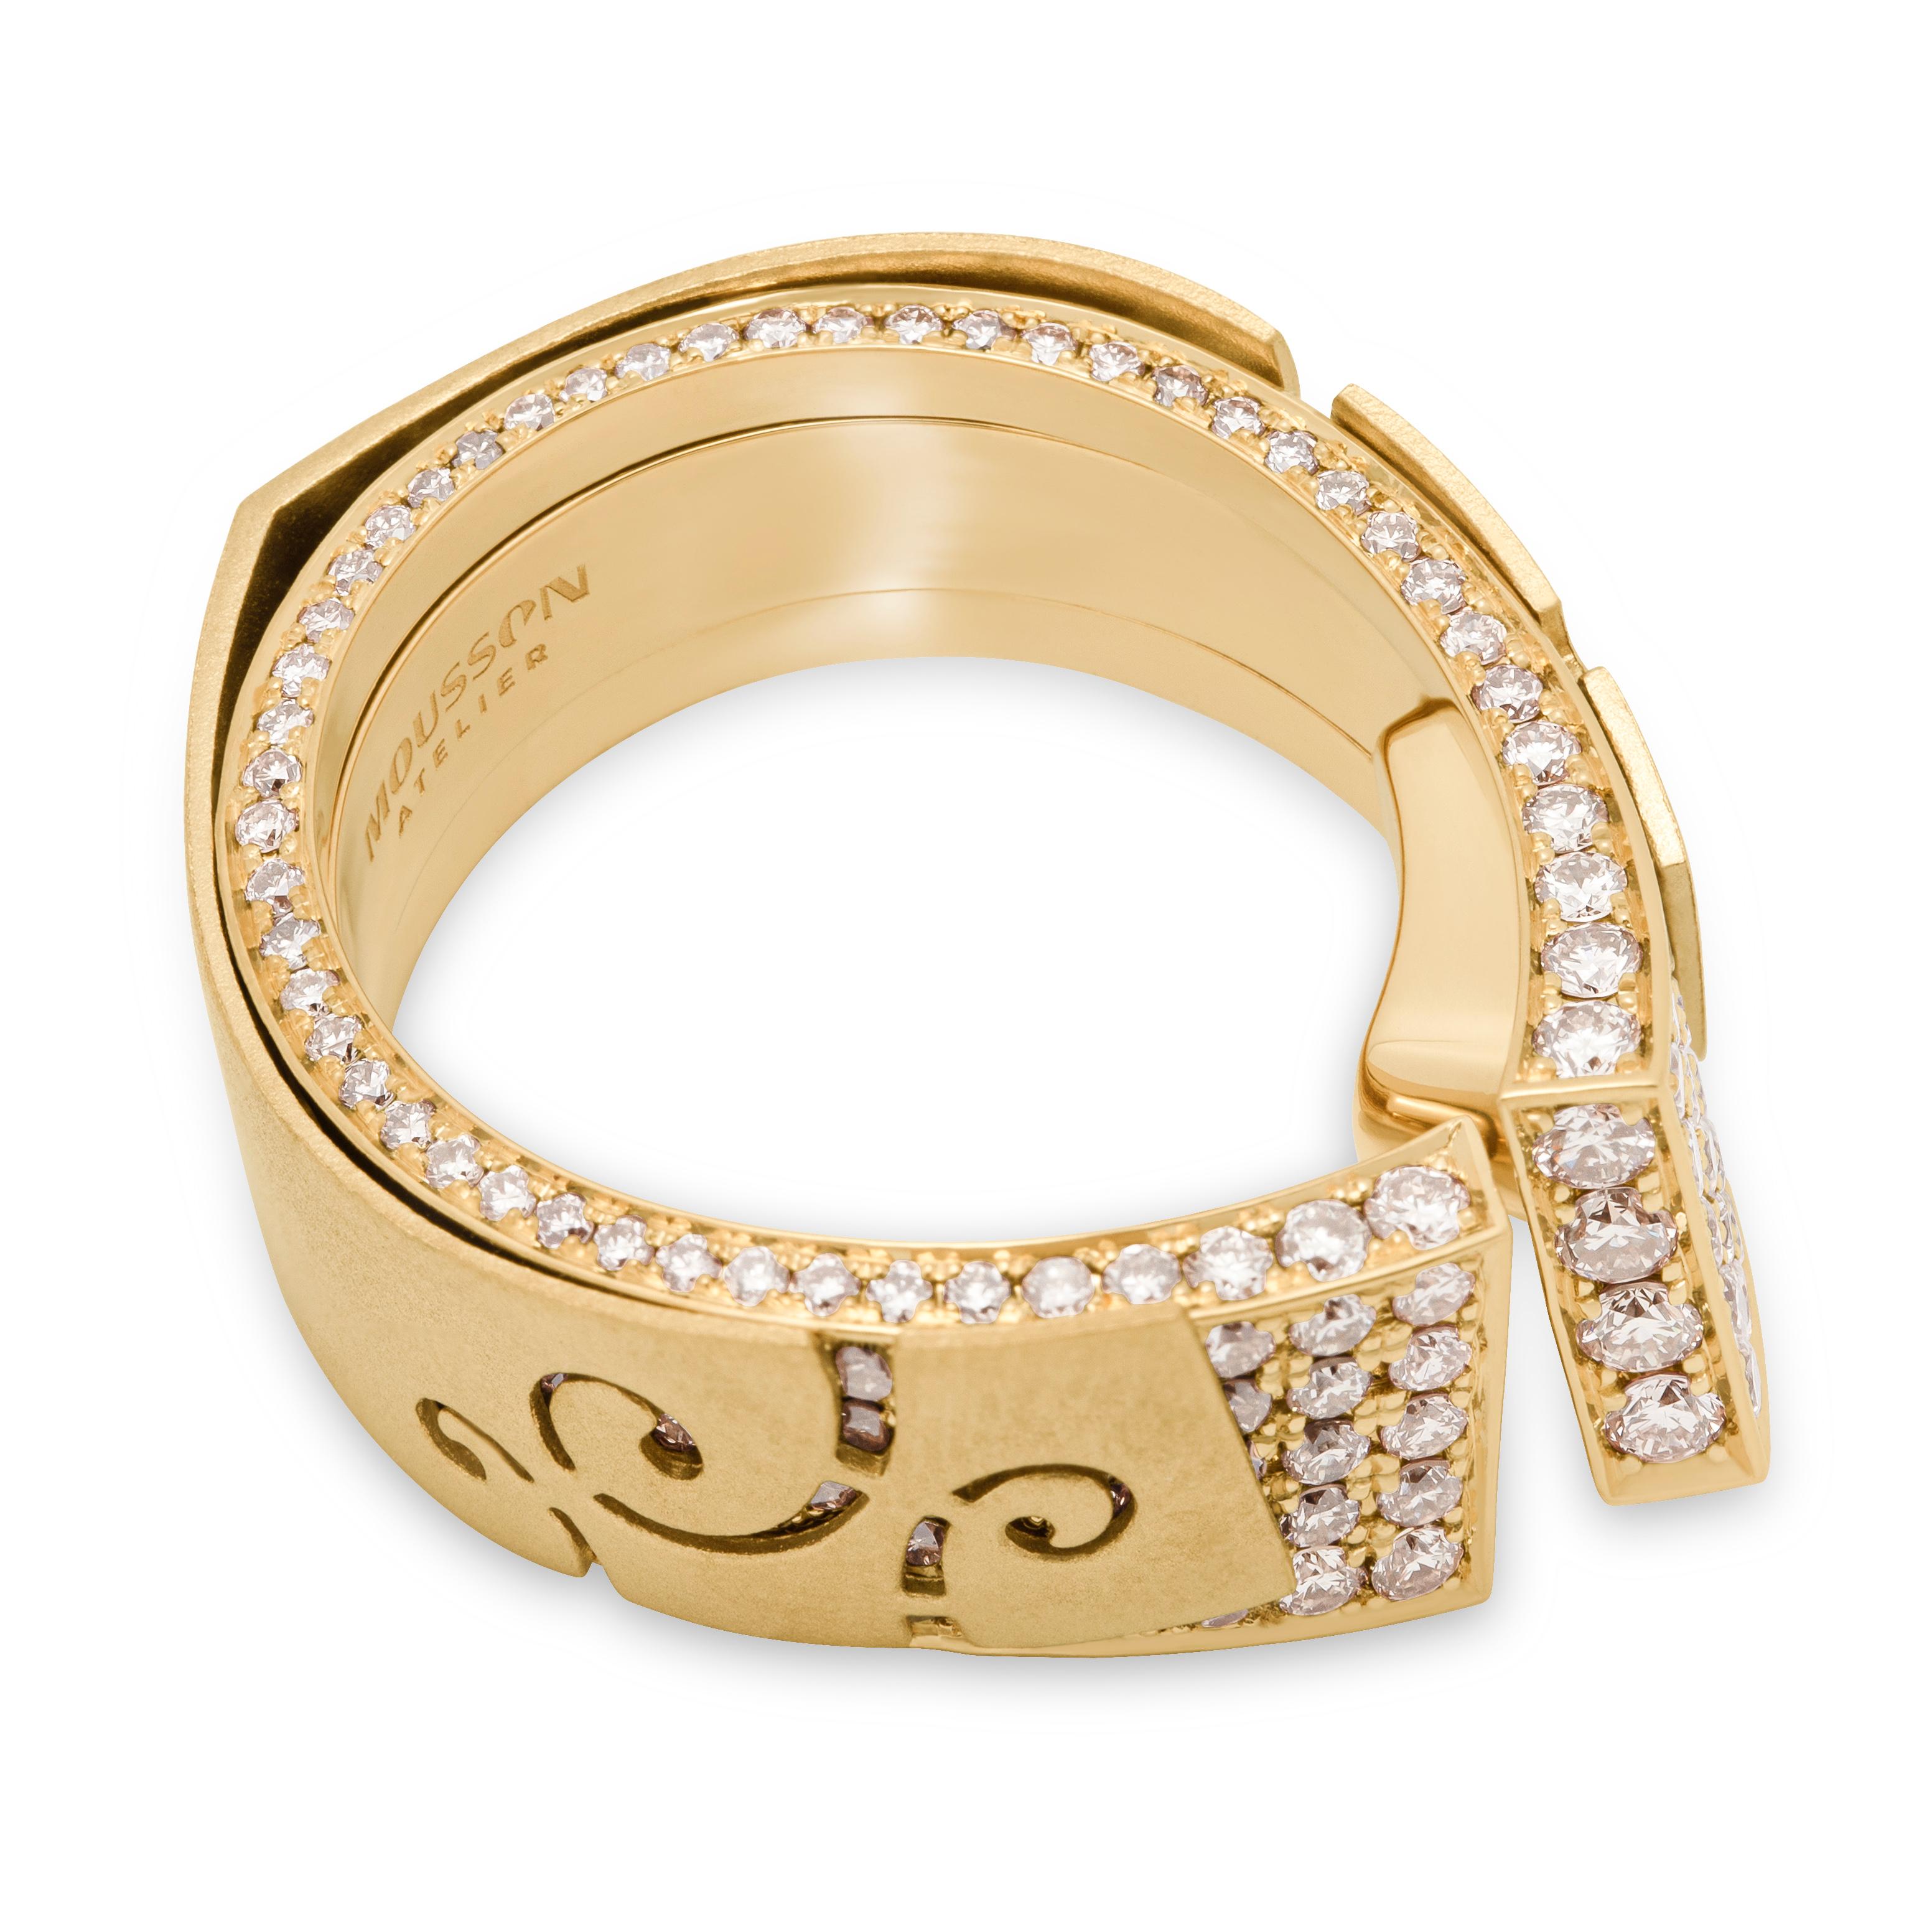 Champagne Diamonds 18 Karat Yellow Gold Pret-a-Porter Studs Suite

Veil inspired this jewelry series by our designers. For example, this Suite seems to have two layers. The first layer is a 